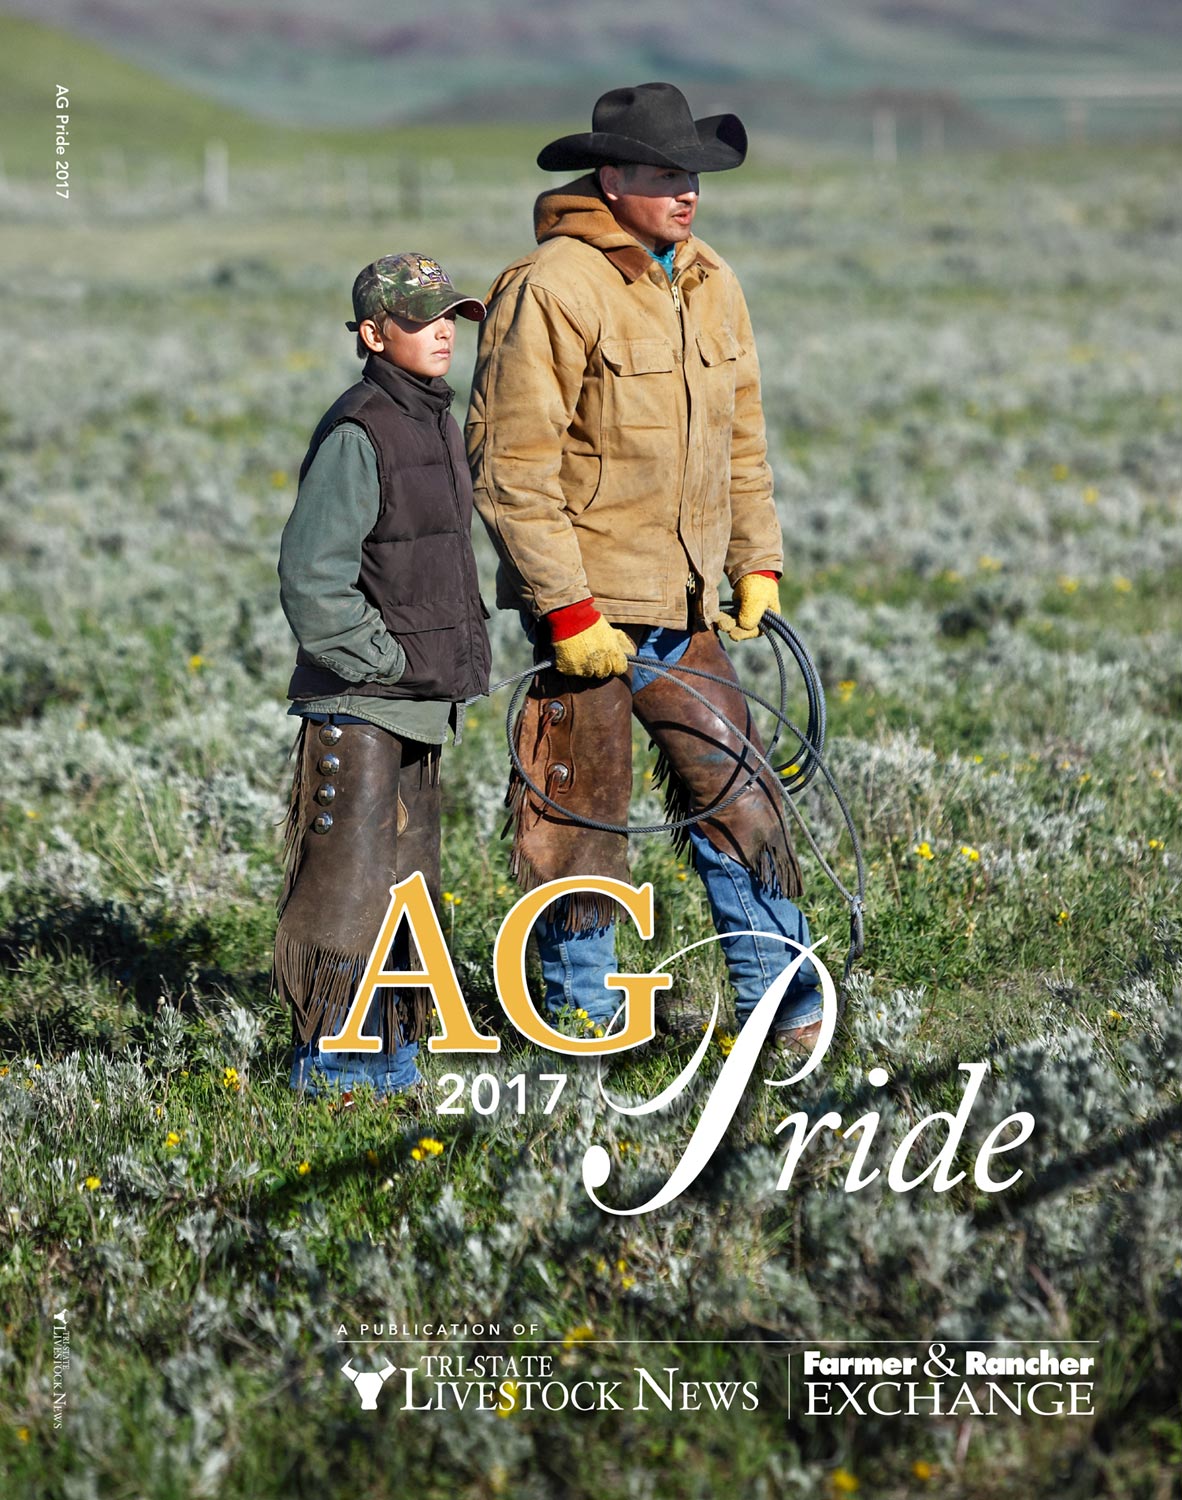 Cowboy and Son Photo on Cover of Agriculture Publication